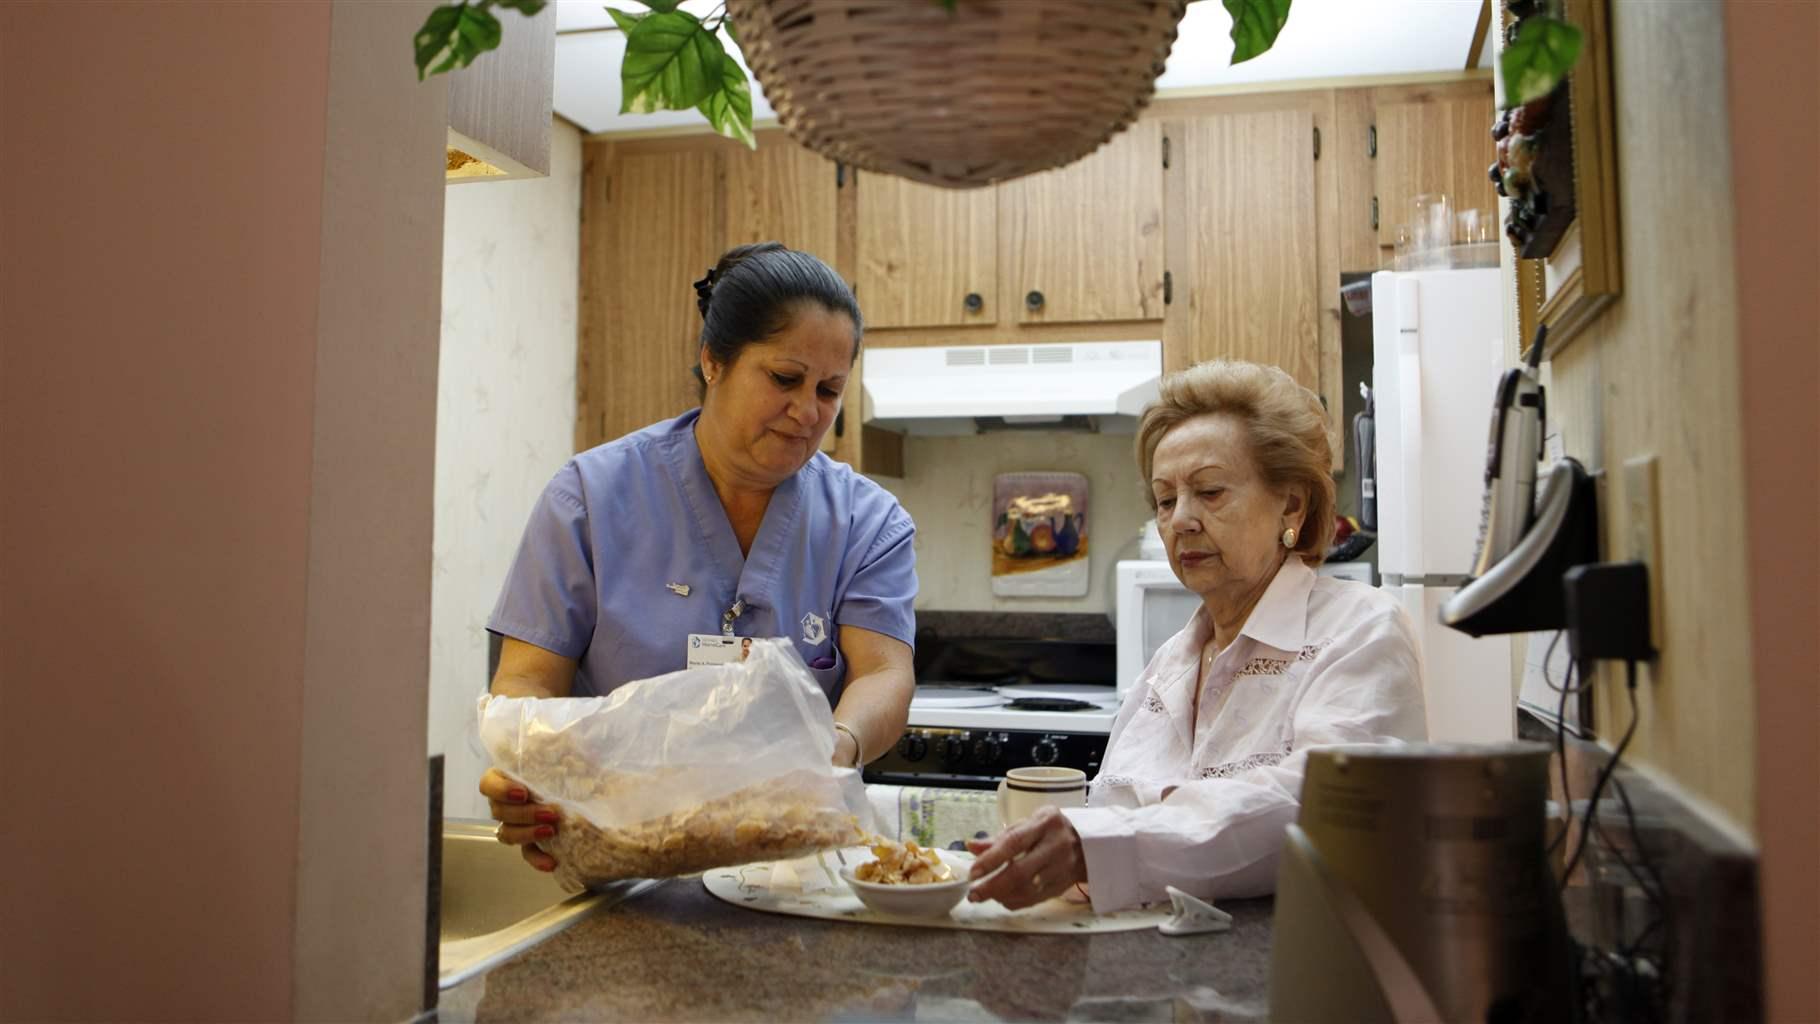 Home care worker with patient inside a kitchen